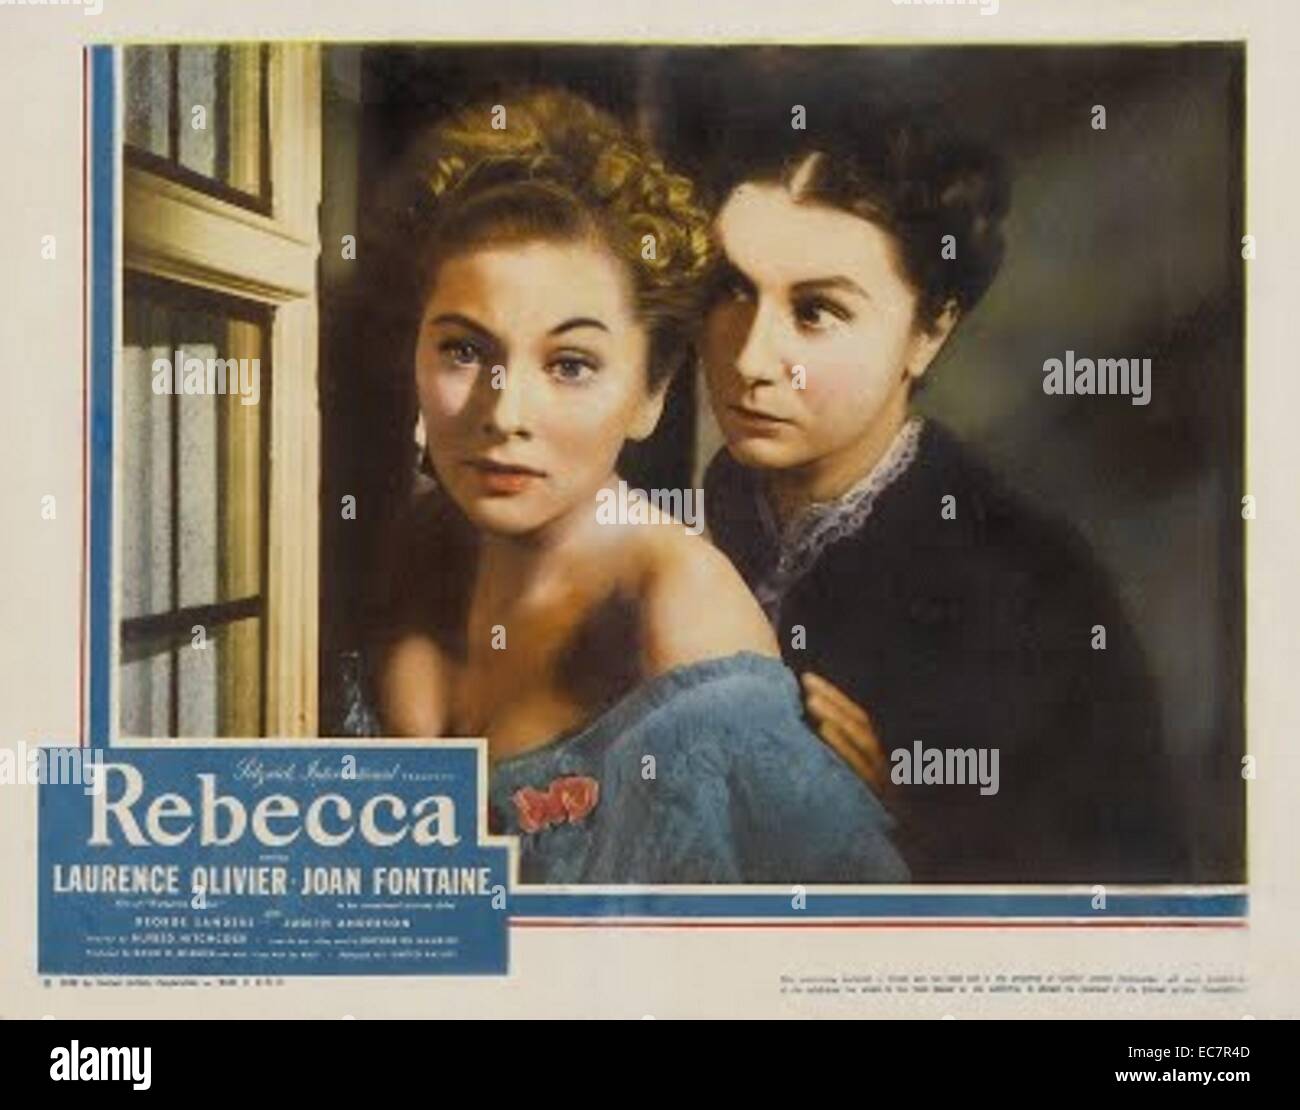 Lobby card for Rebecca, a 1940 American psychological drama-thriller film. Directed by Alfred Hitchcock, it was his first American project. Starring Laurence Olivier and Joan Fontaine. Stock Photo